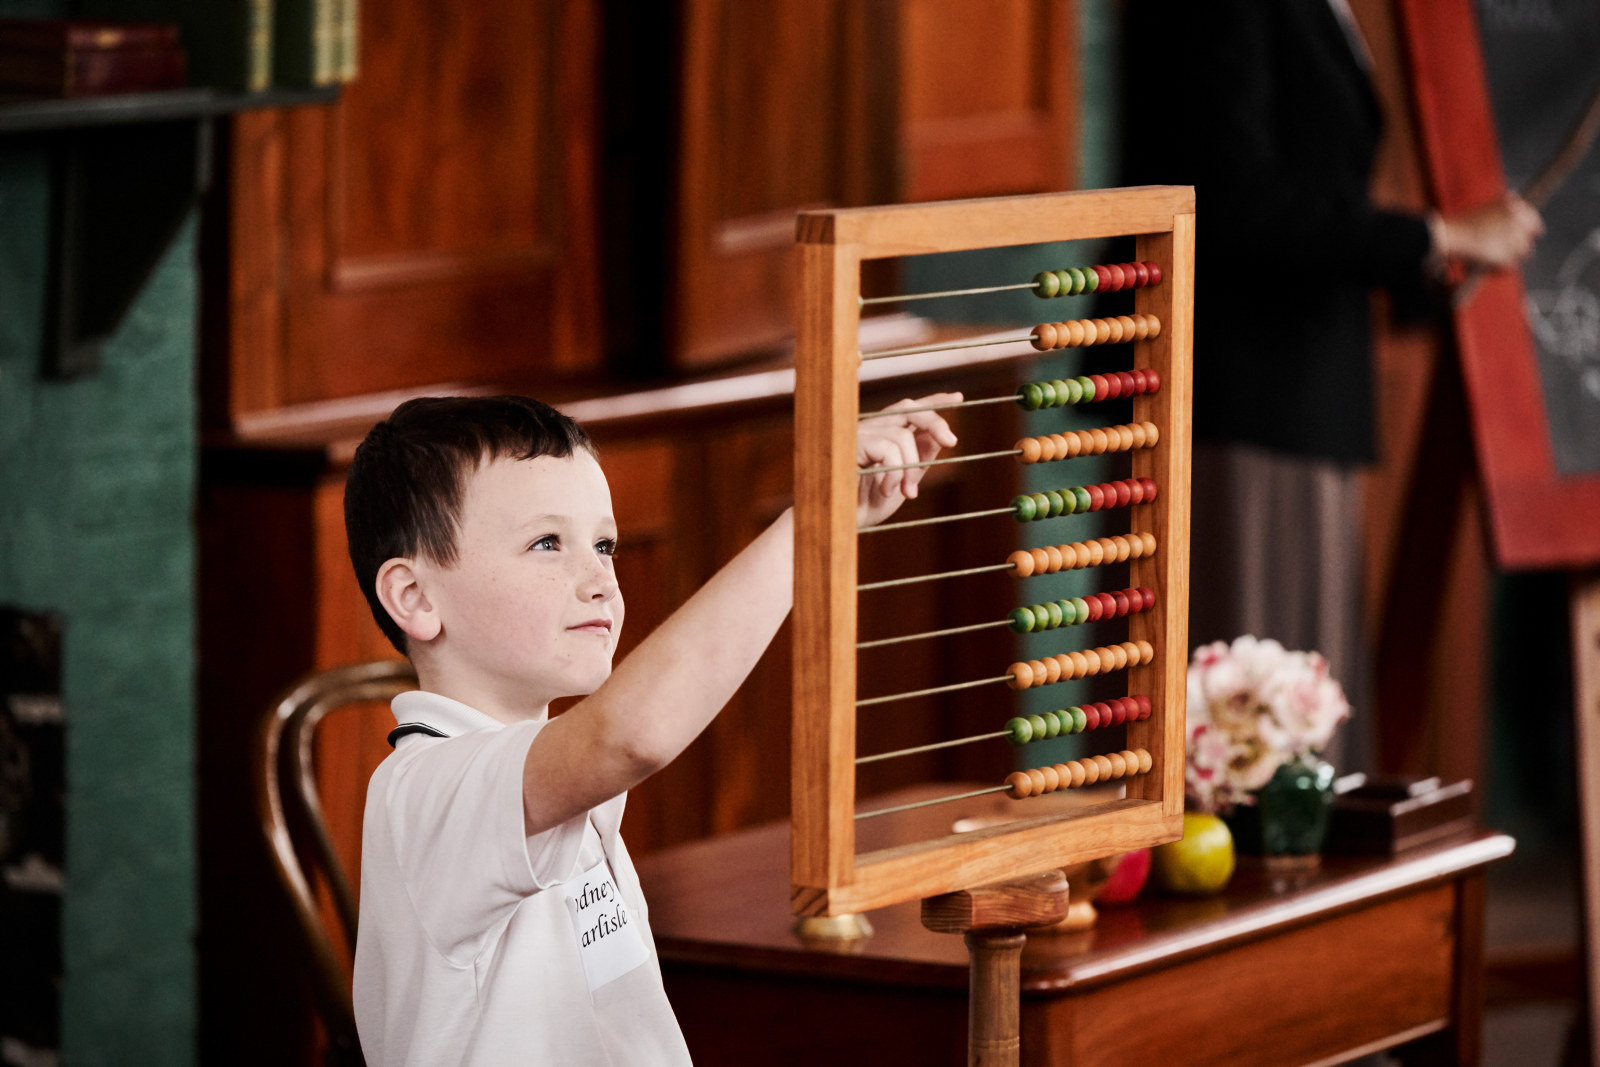 A student using an abacus during a maths lesson as part of Lessons from the Past at Rouse Hill Estate